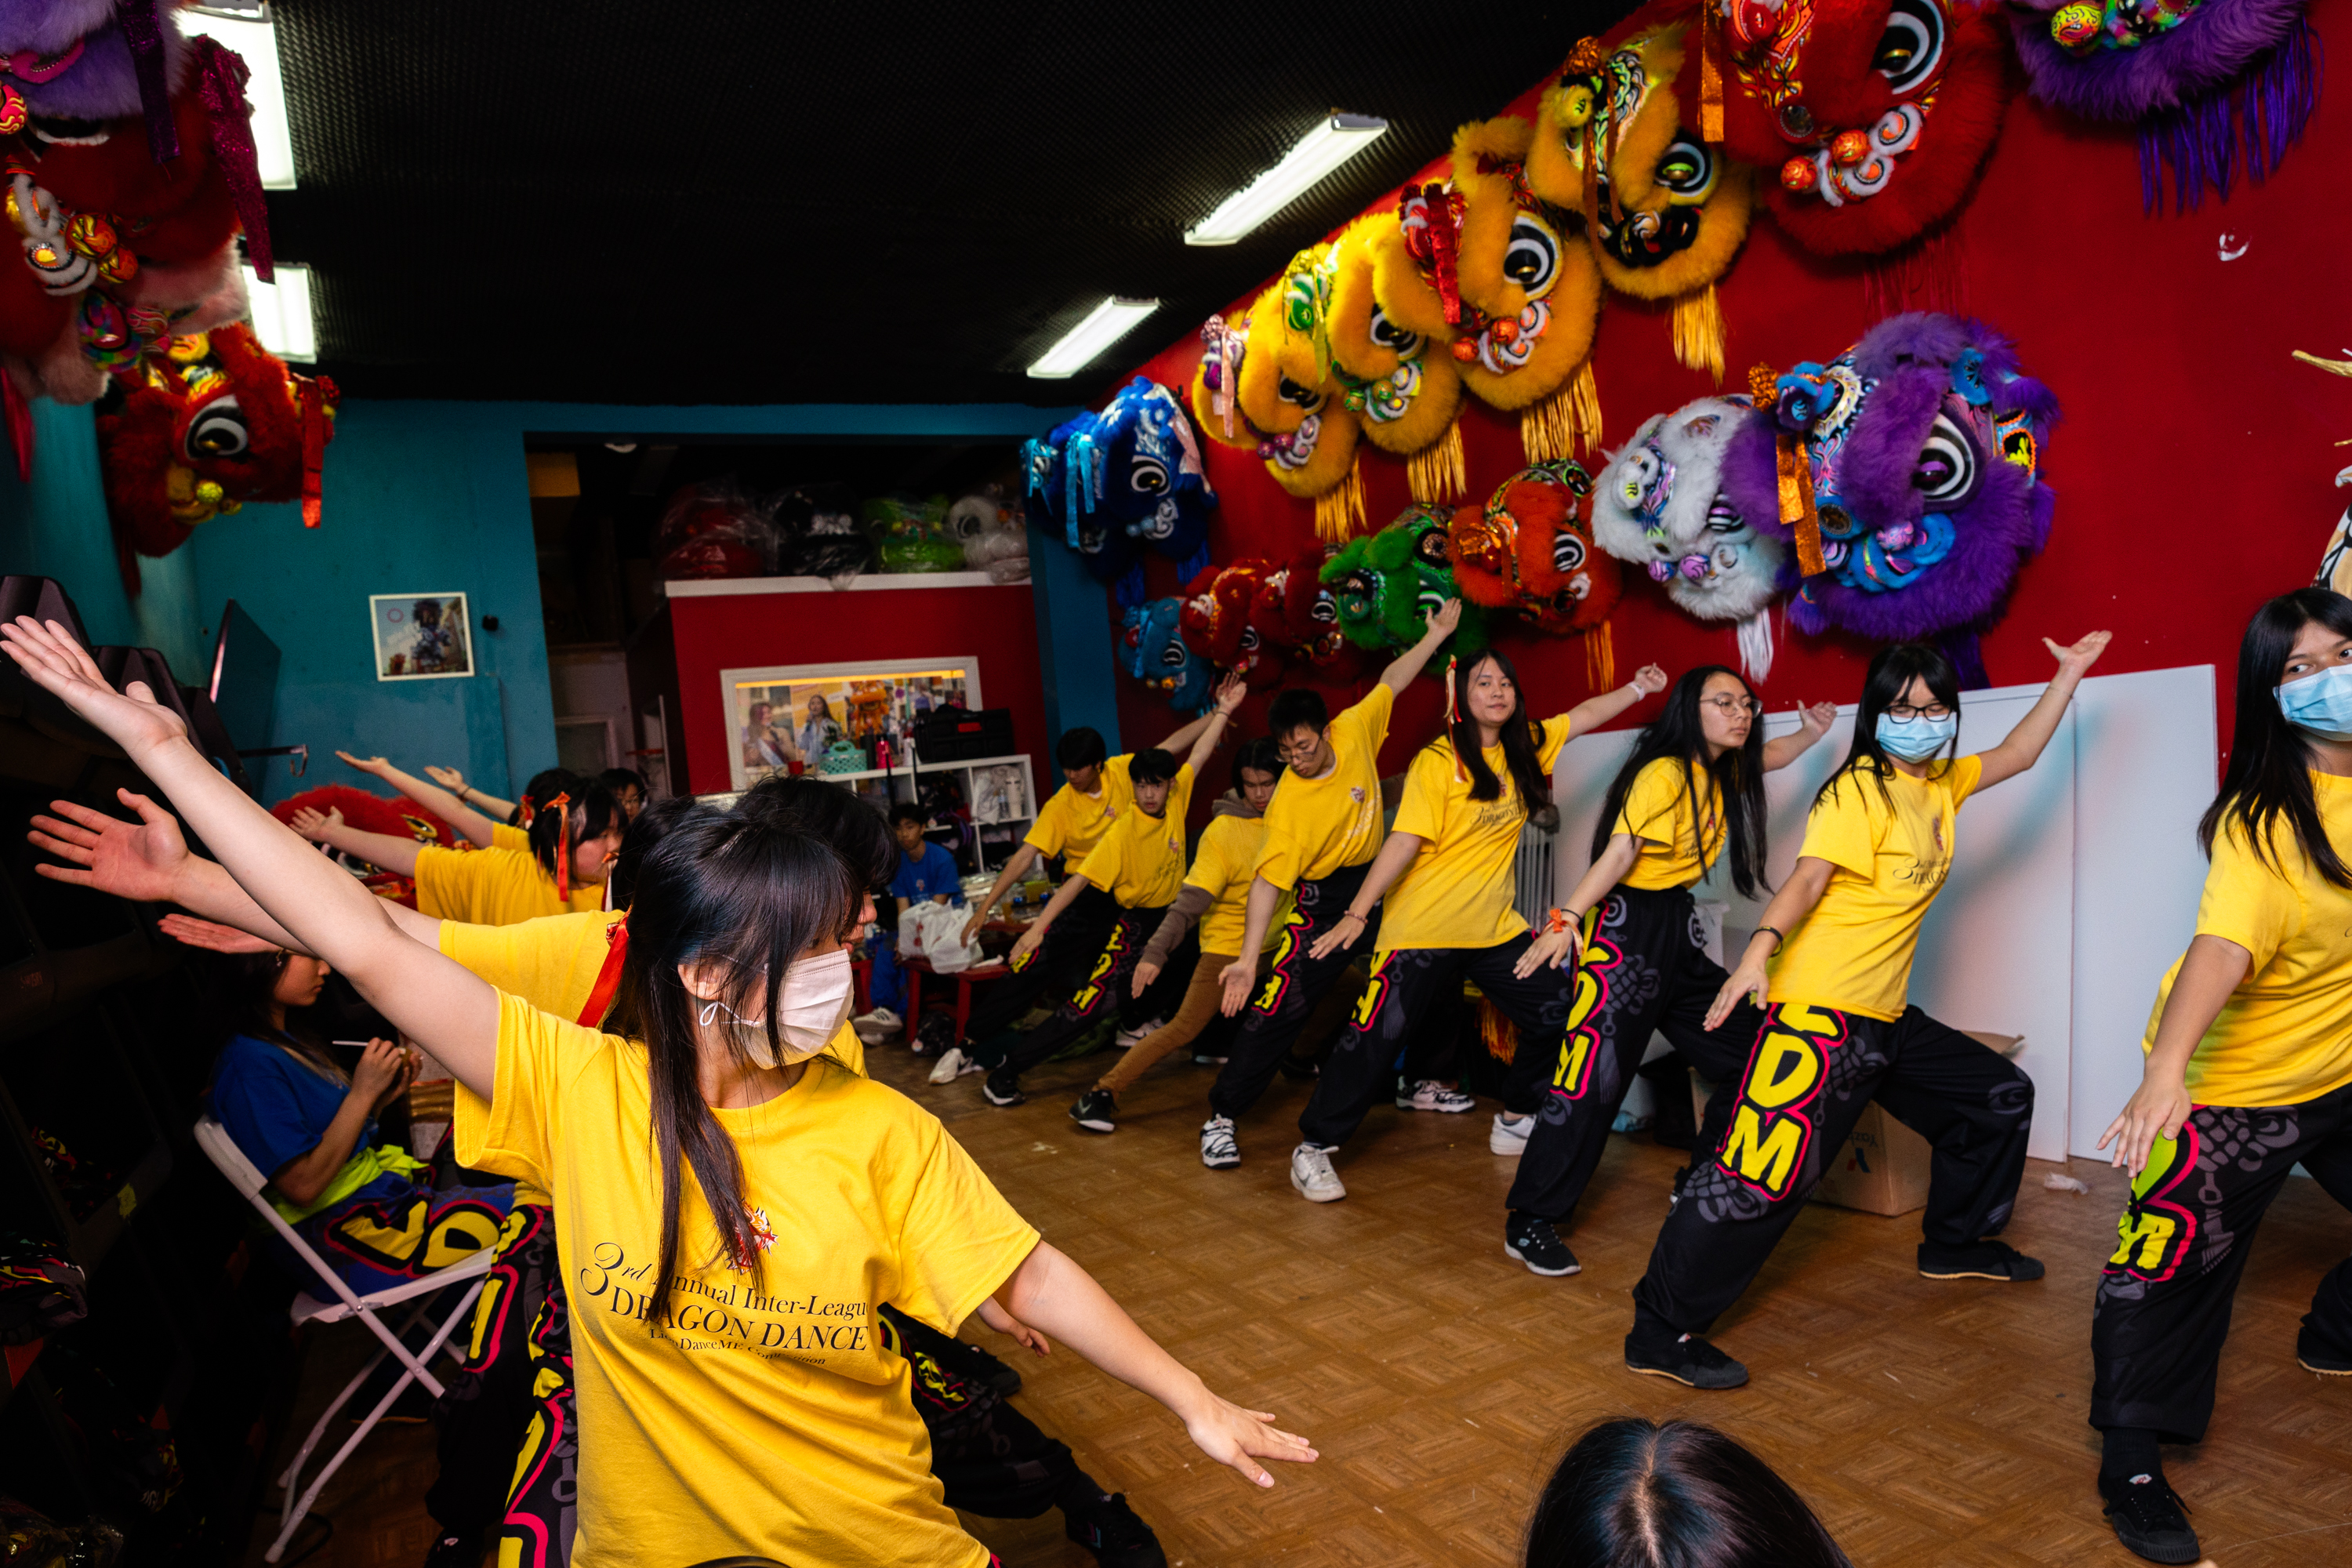 People in yellow shirts and masks are practicing a dance, with colorful lion dance masks decorating the wall behind them.